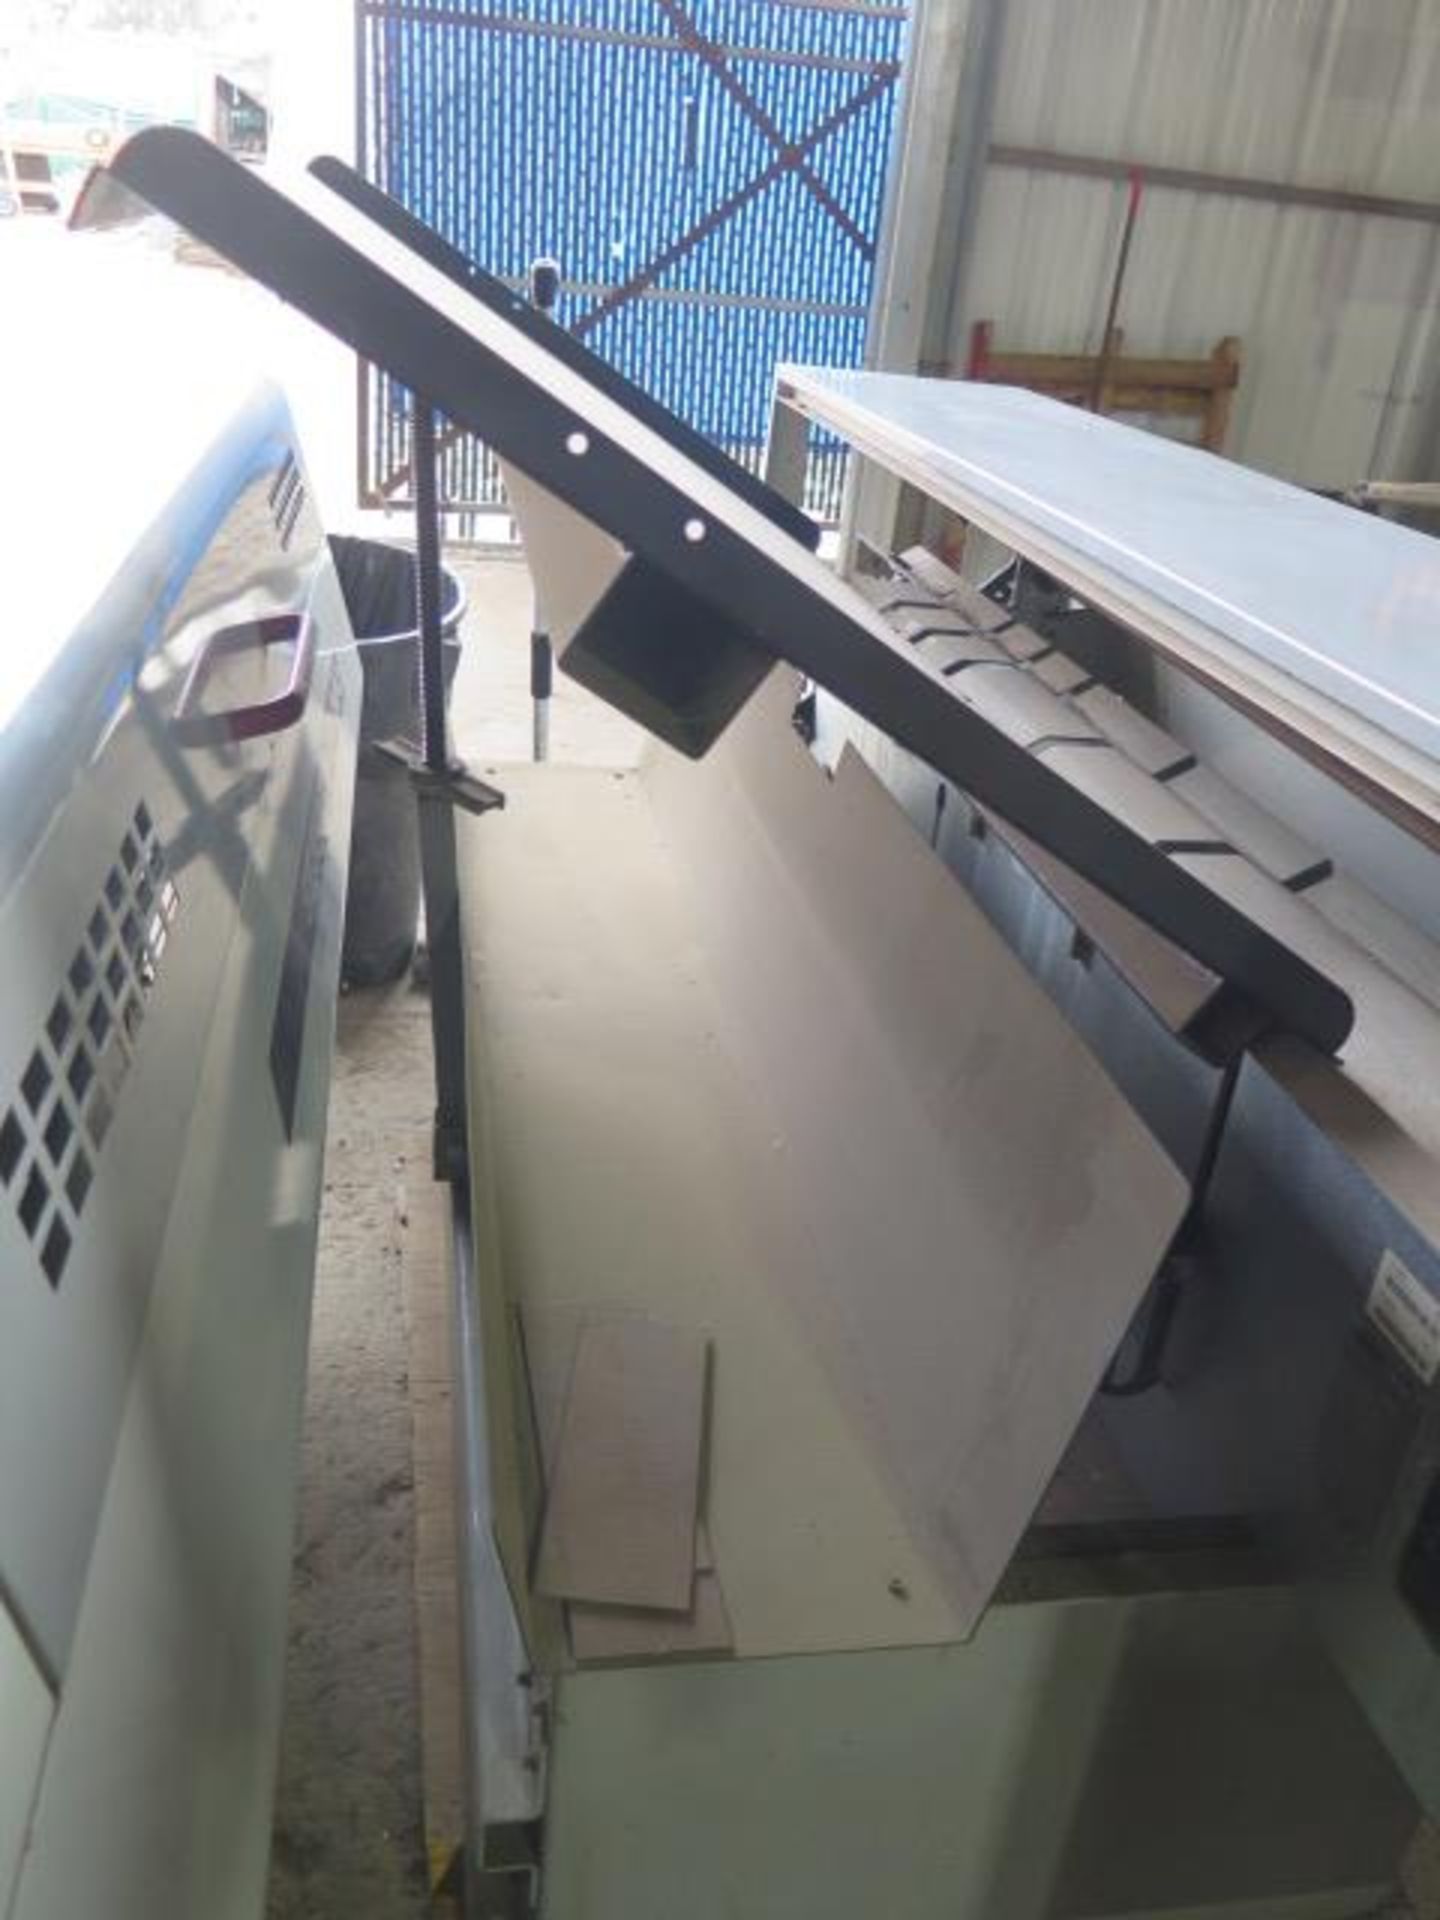 Haas ServoBar 300 Automatic Bar Loader / Feeder (SOLD AS-IS - NO WARRANTY) - Image 7 of 8